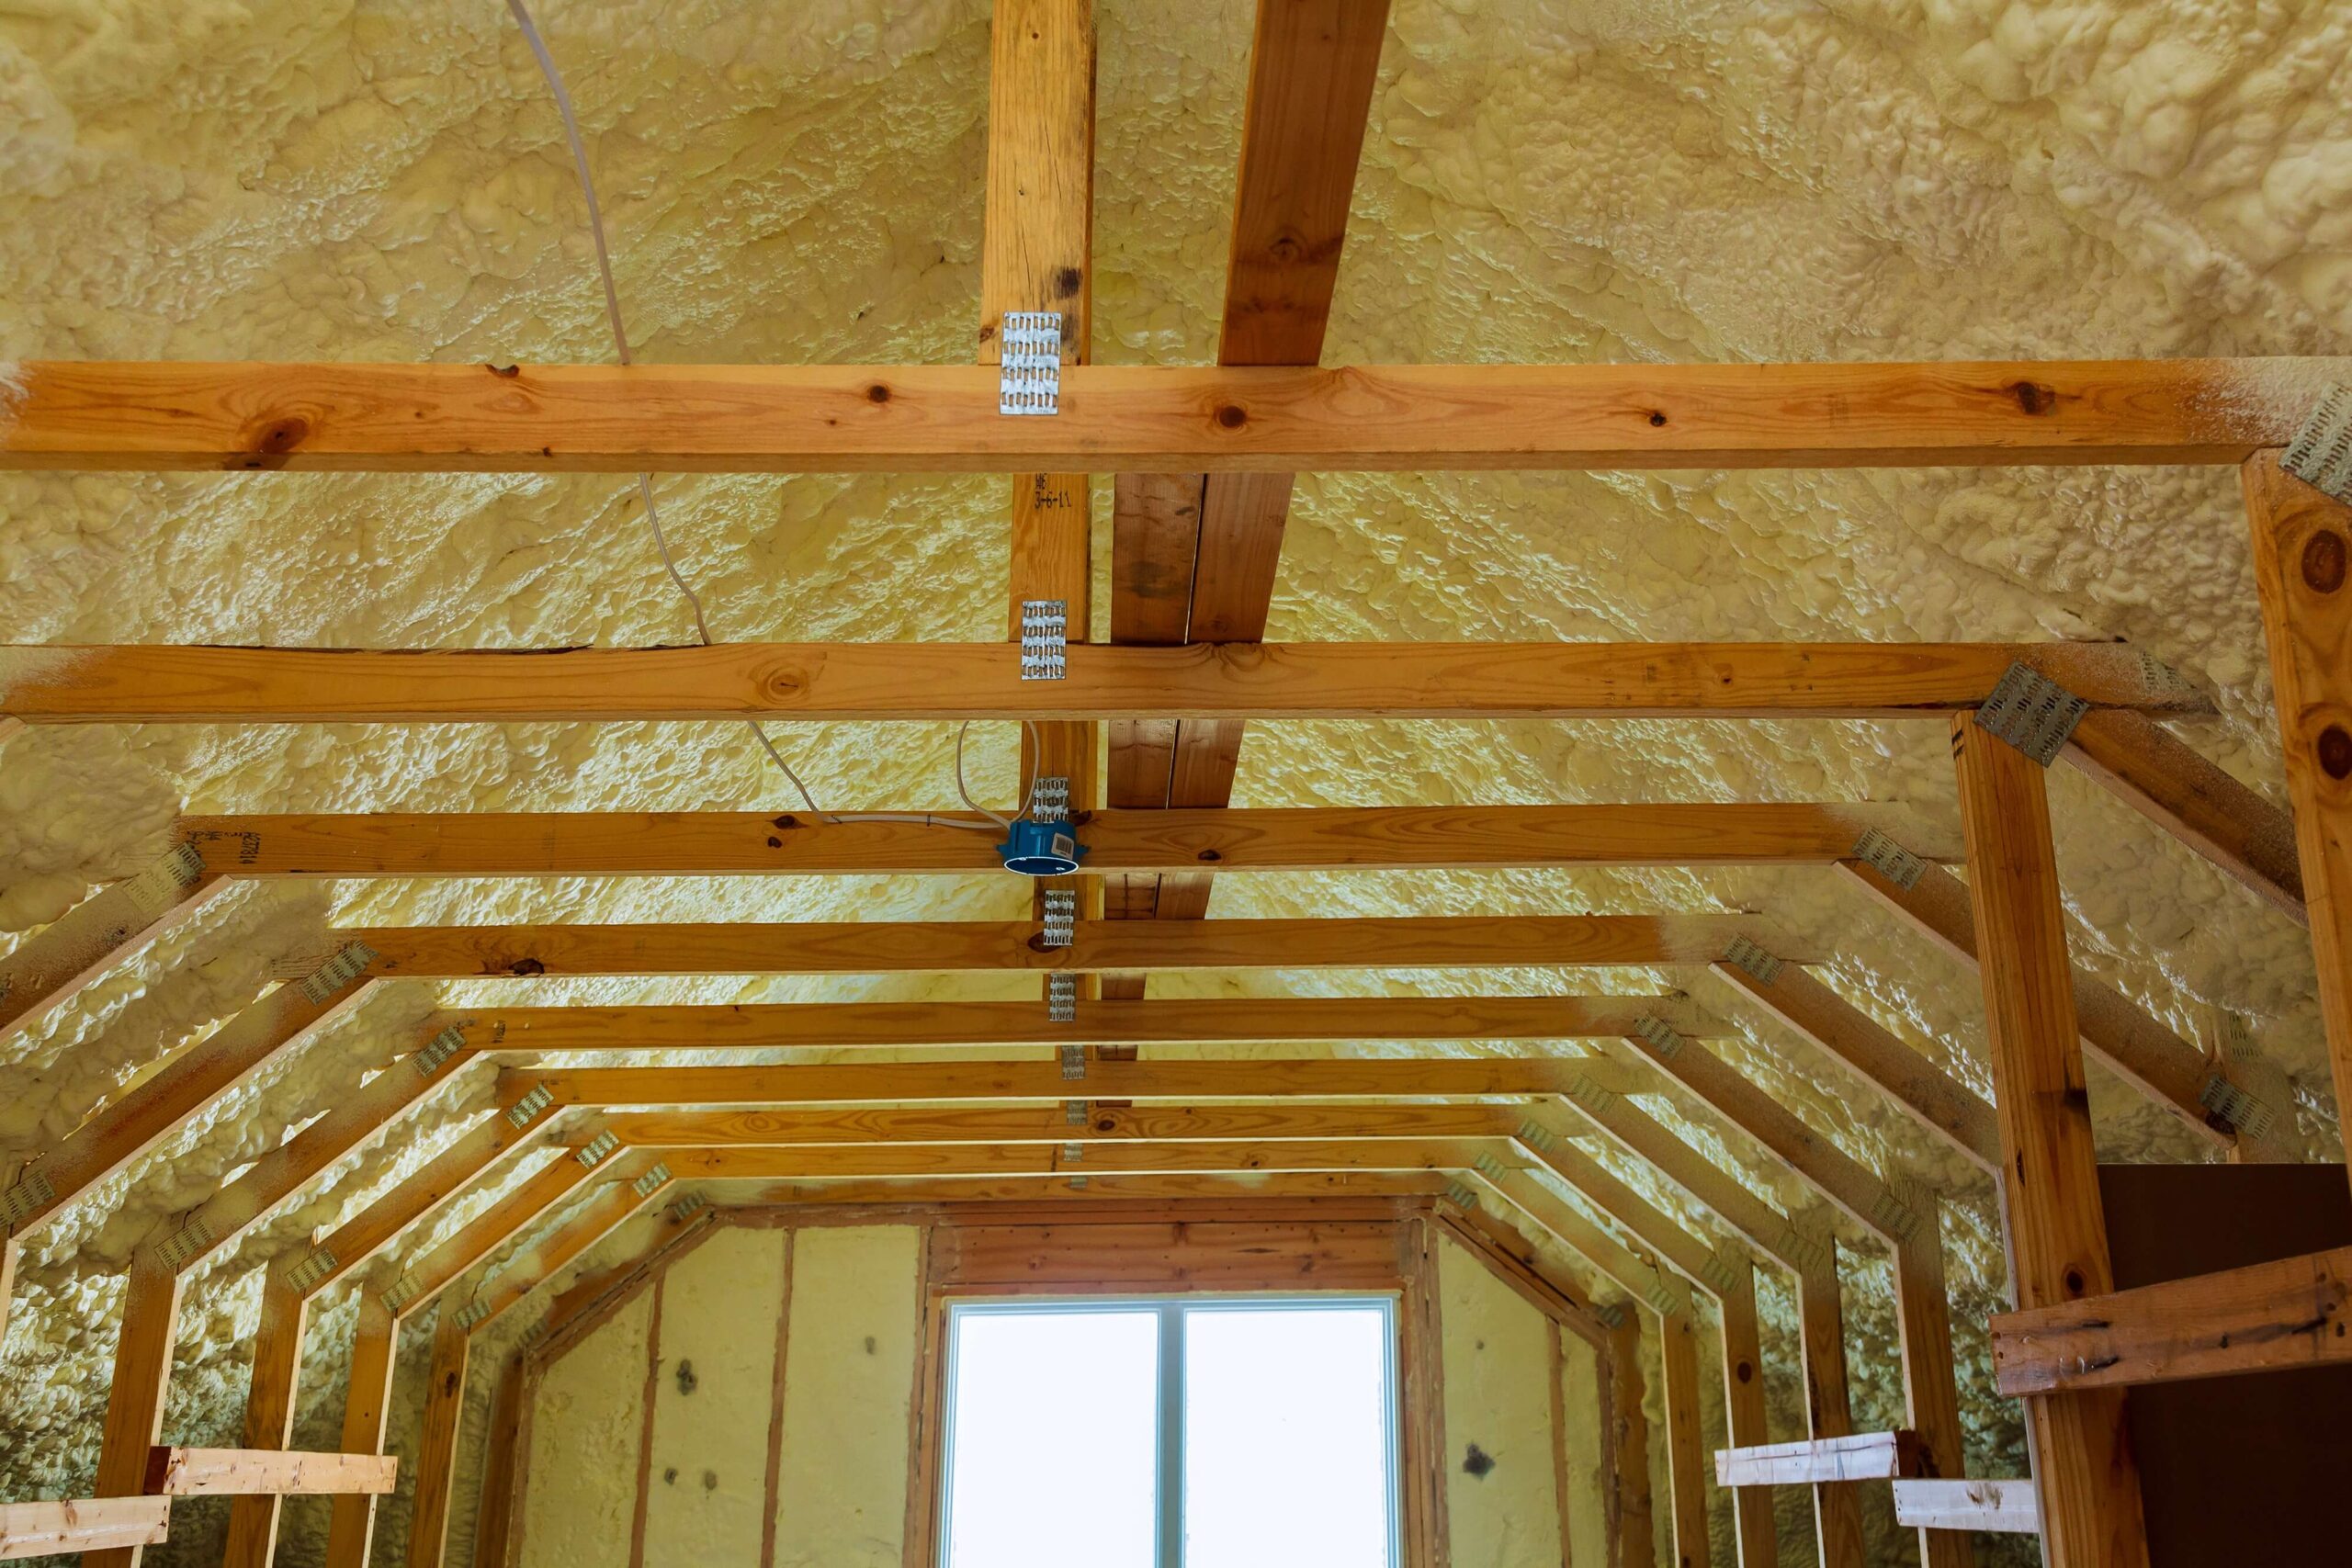 The inside of an attic with wood beams and insulation.